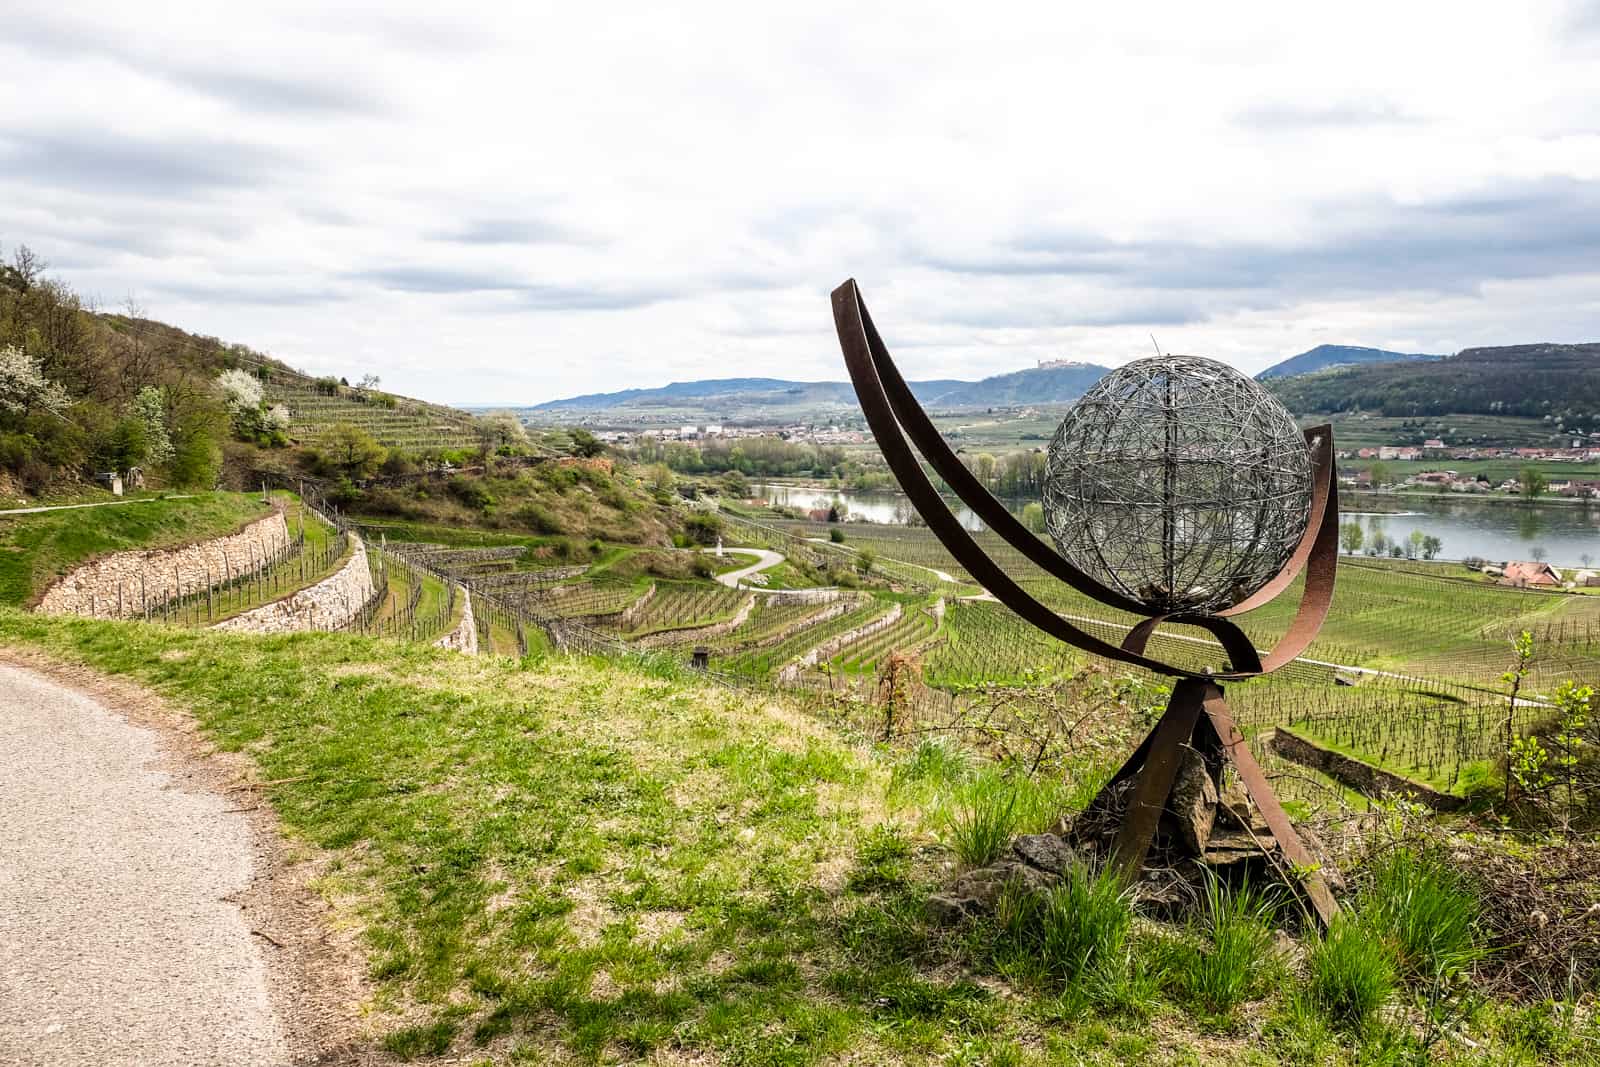 An art sculpture with a grey wire head and metal arms on The Wachau World Heritage Trail set in the terraced vineyard hills